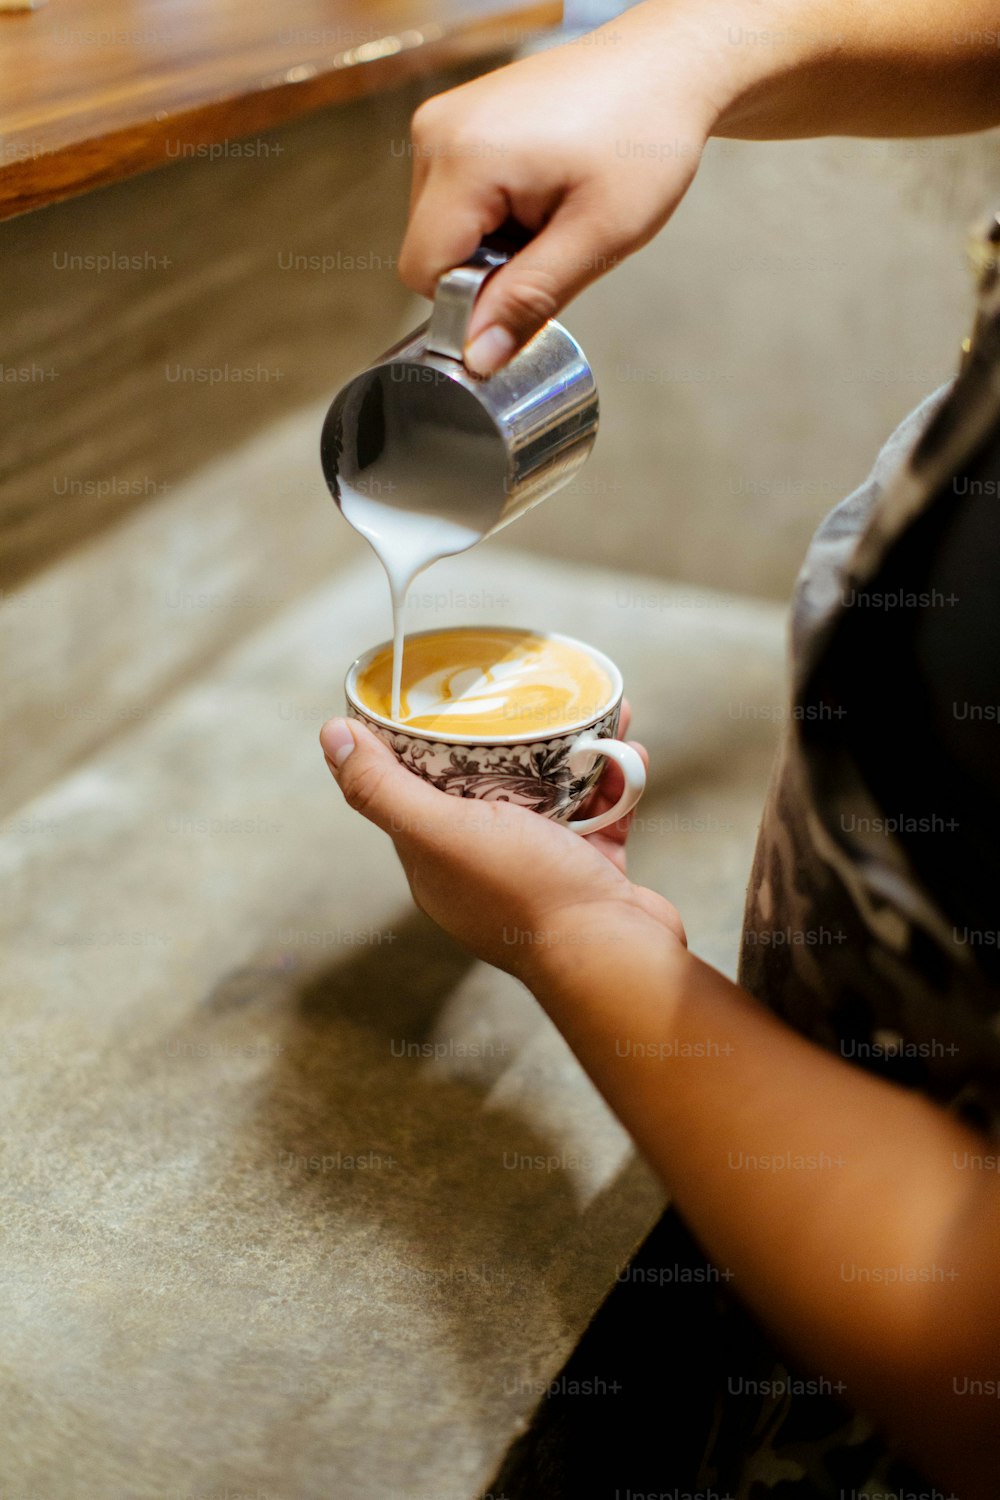 a person pouring a liquid into a cup